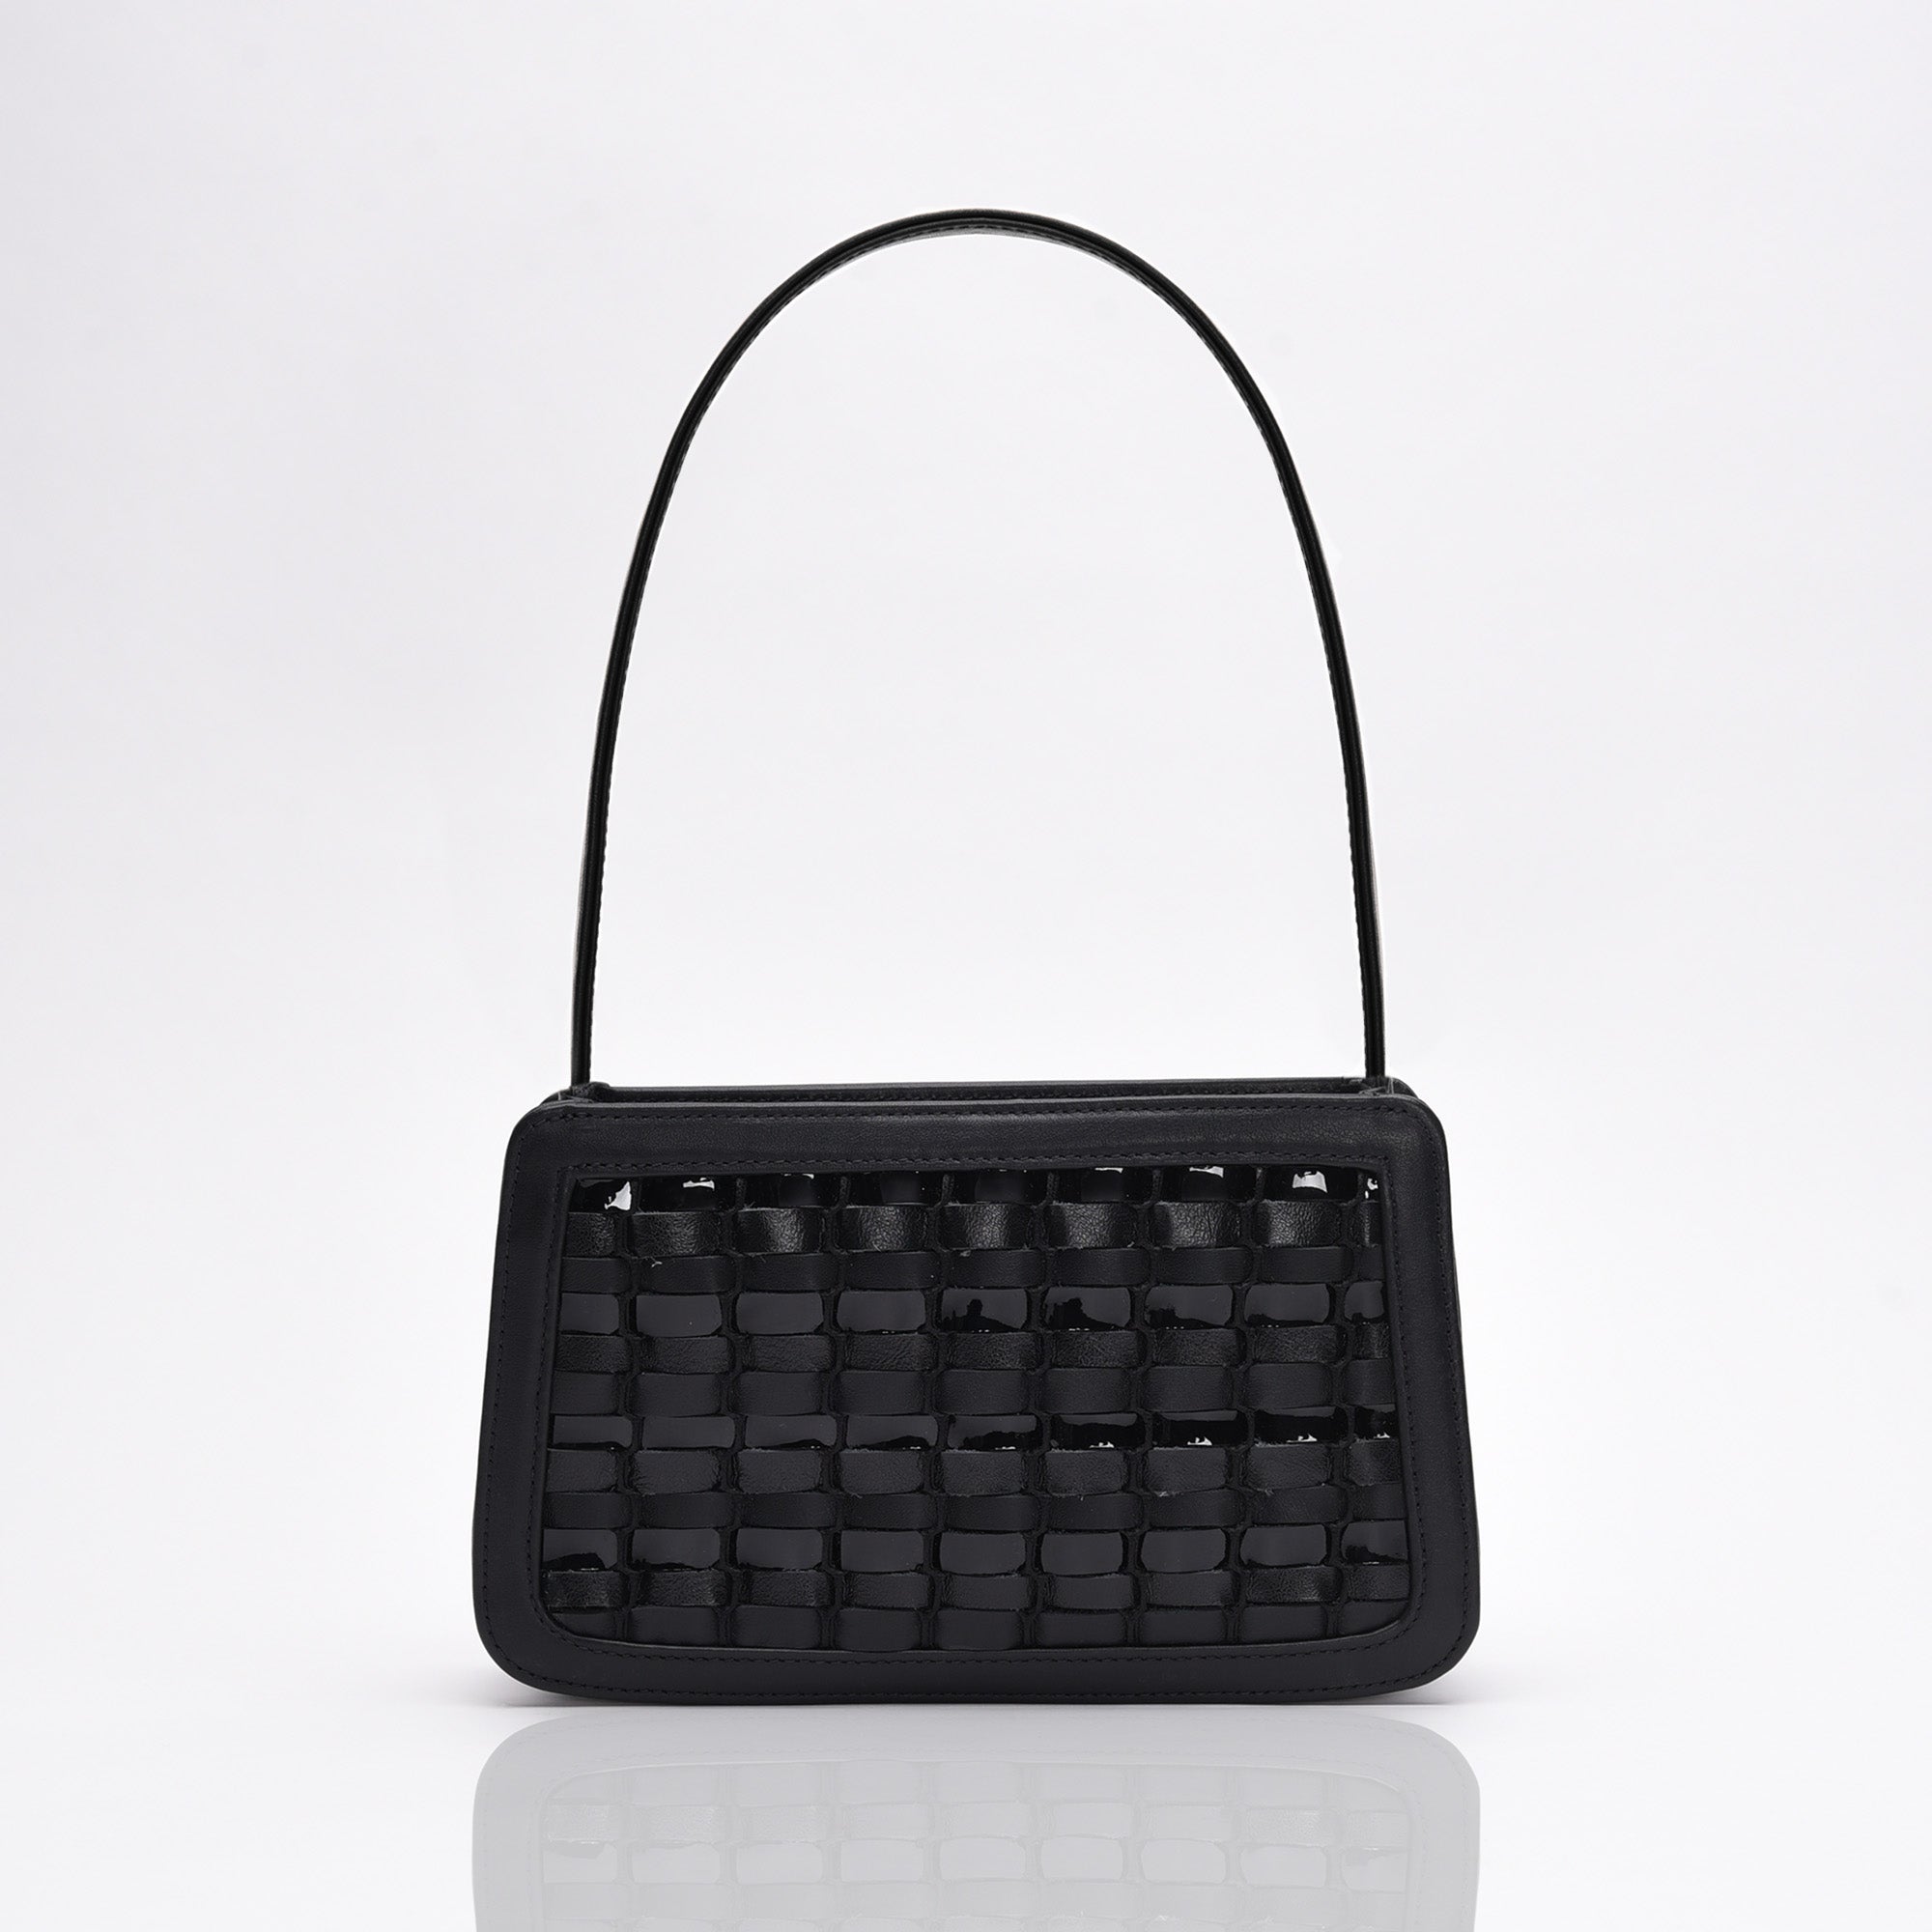 picture of made in USA Luxury Leather Handbag hand-woven with multiple leathers in various matte black colorways